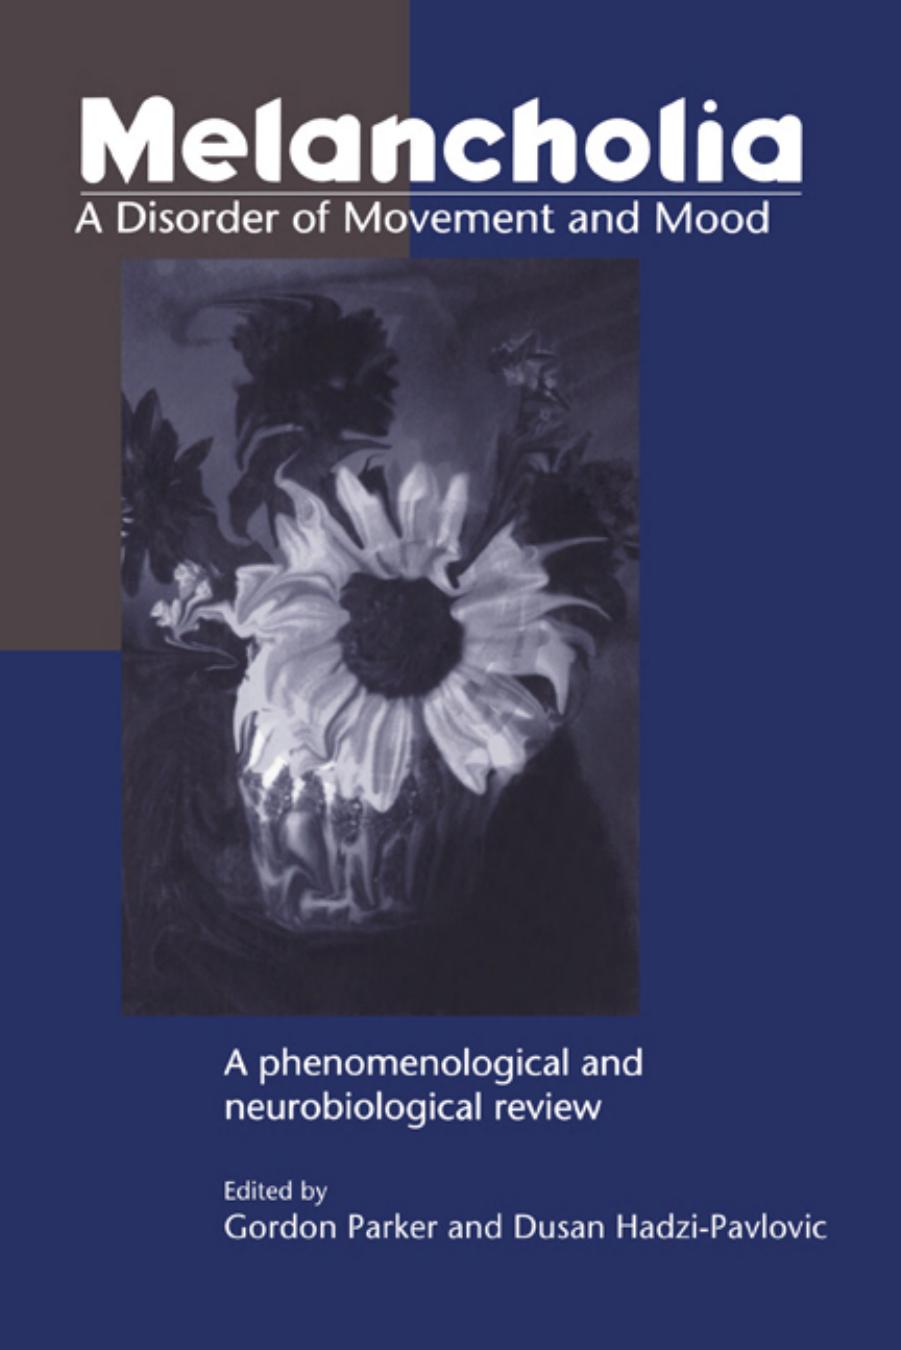 Melancholia: A Disorder of Movement and Mood: A Phenomenological and Neurobiological Review by Gordon Parker (editor) Dusan Hadzi-Pavlovic (editor)